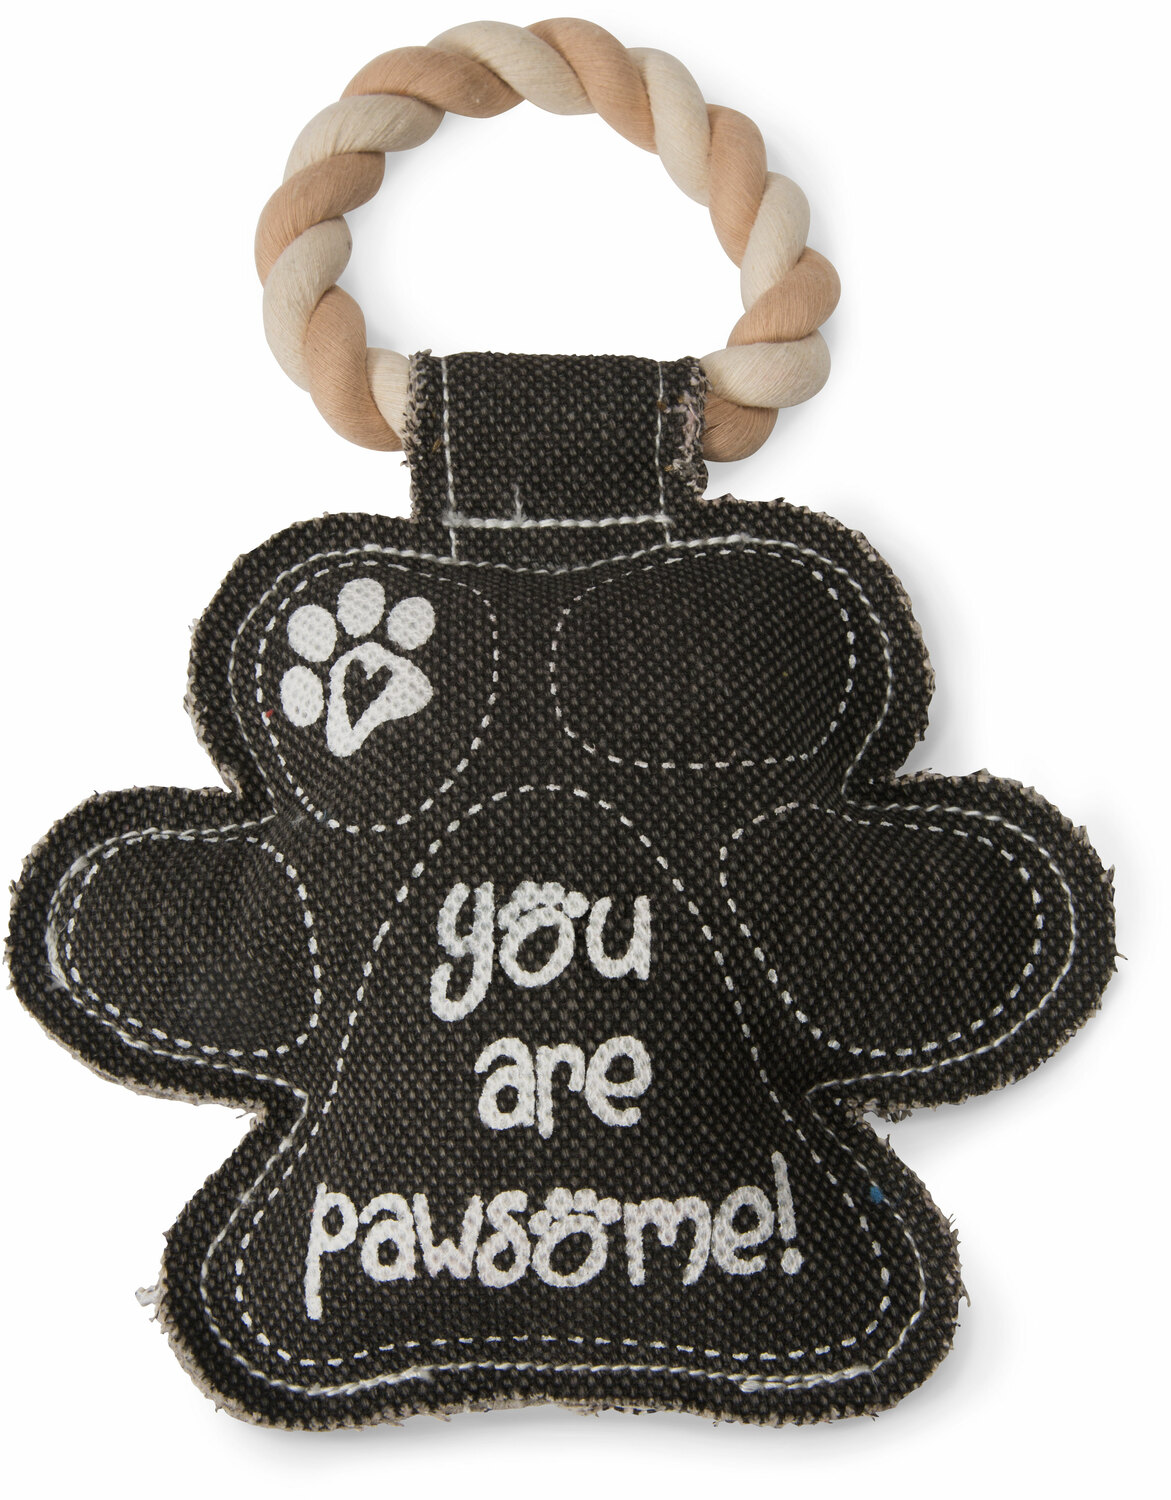 Pawprint by Pavilion's Pets - You are Pawesome Paw Shaped Sturdy Canvas Tug of War Dog Toy